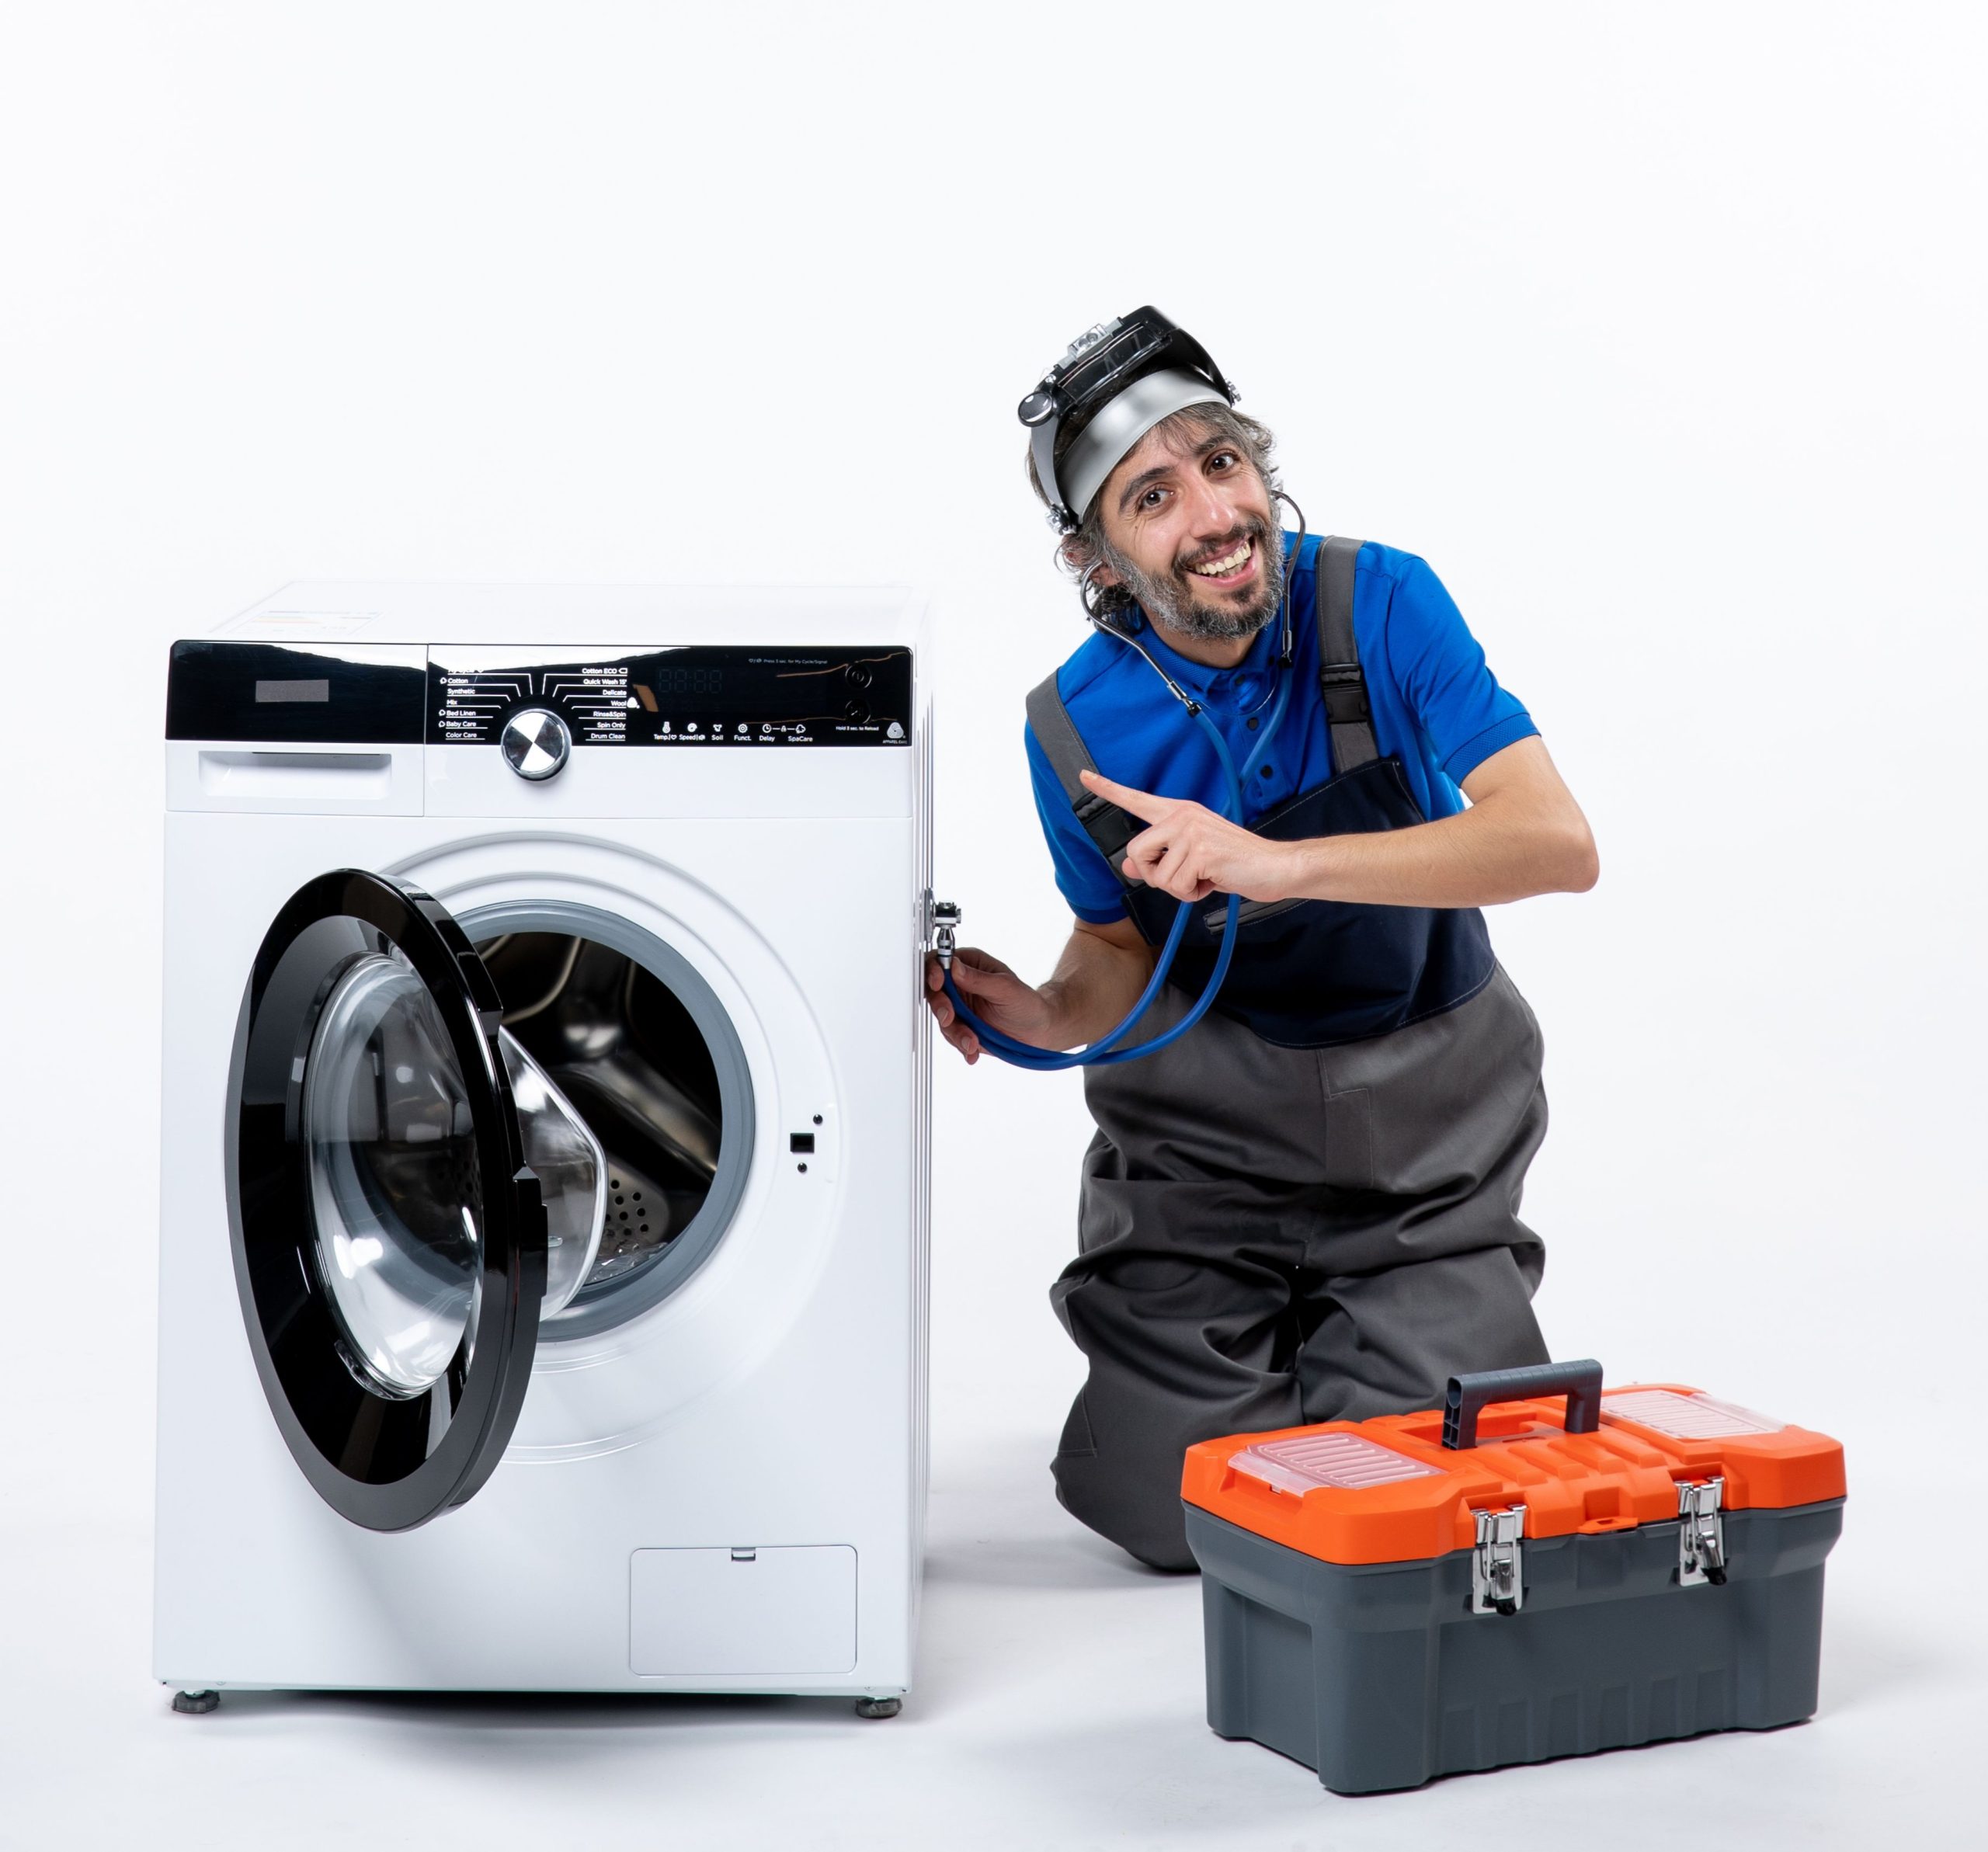 Appliance Repair Oro Valley Dependable Refrigeration & Appliance Repair Service